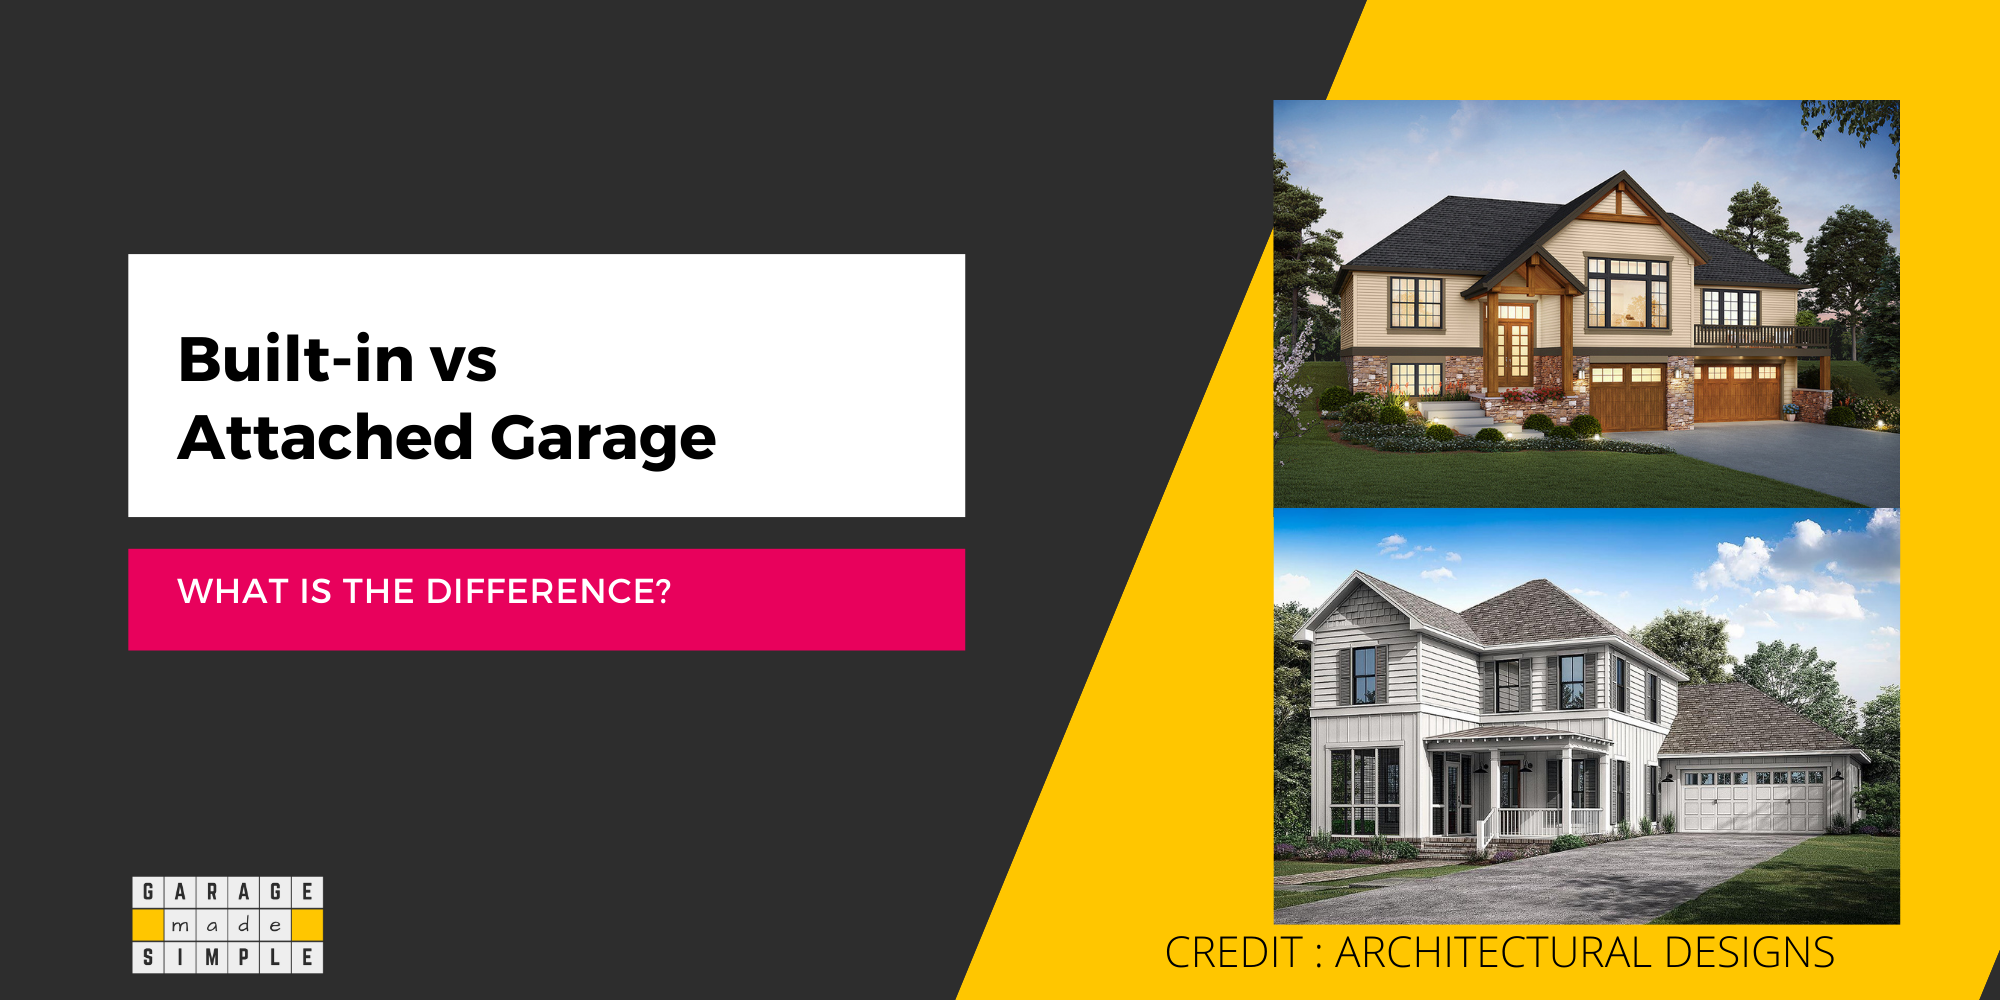 Built-in Vs Attached Garage: Which Is Better?